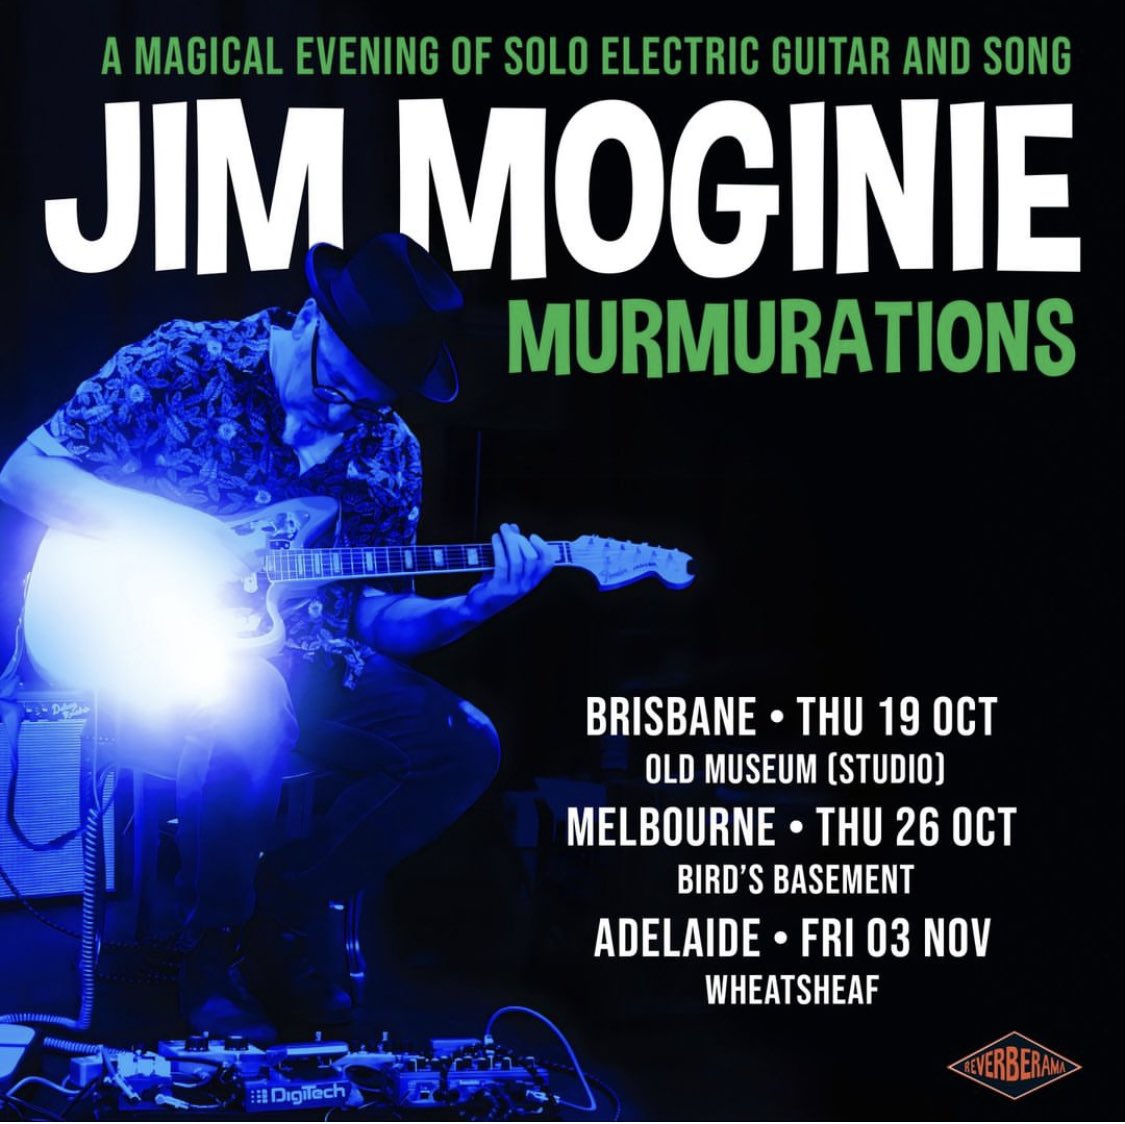 Coming soon to Brisbane Melbourne and Adelaide. Tickets at jimmoginie.com